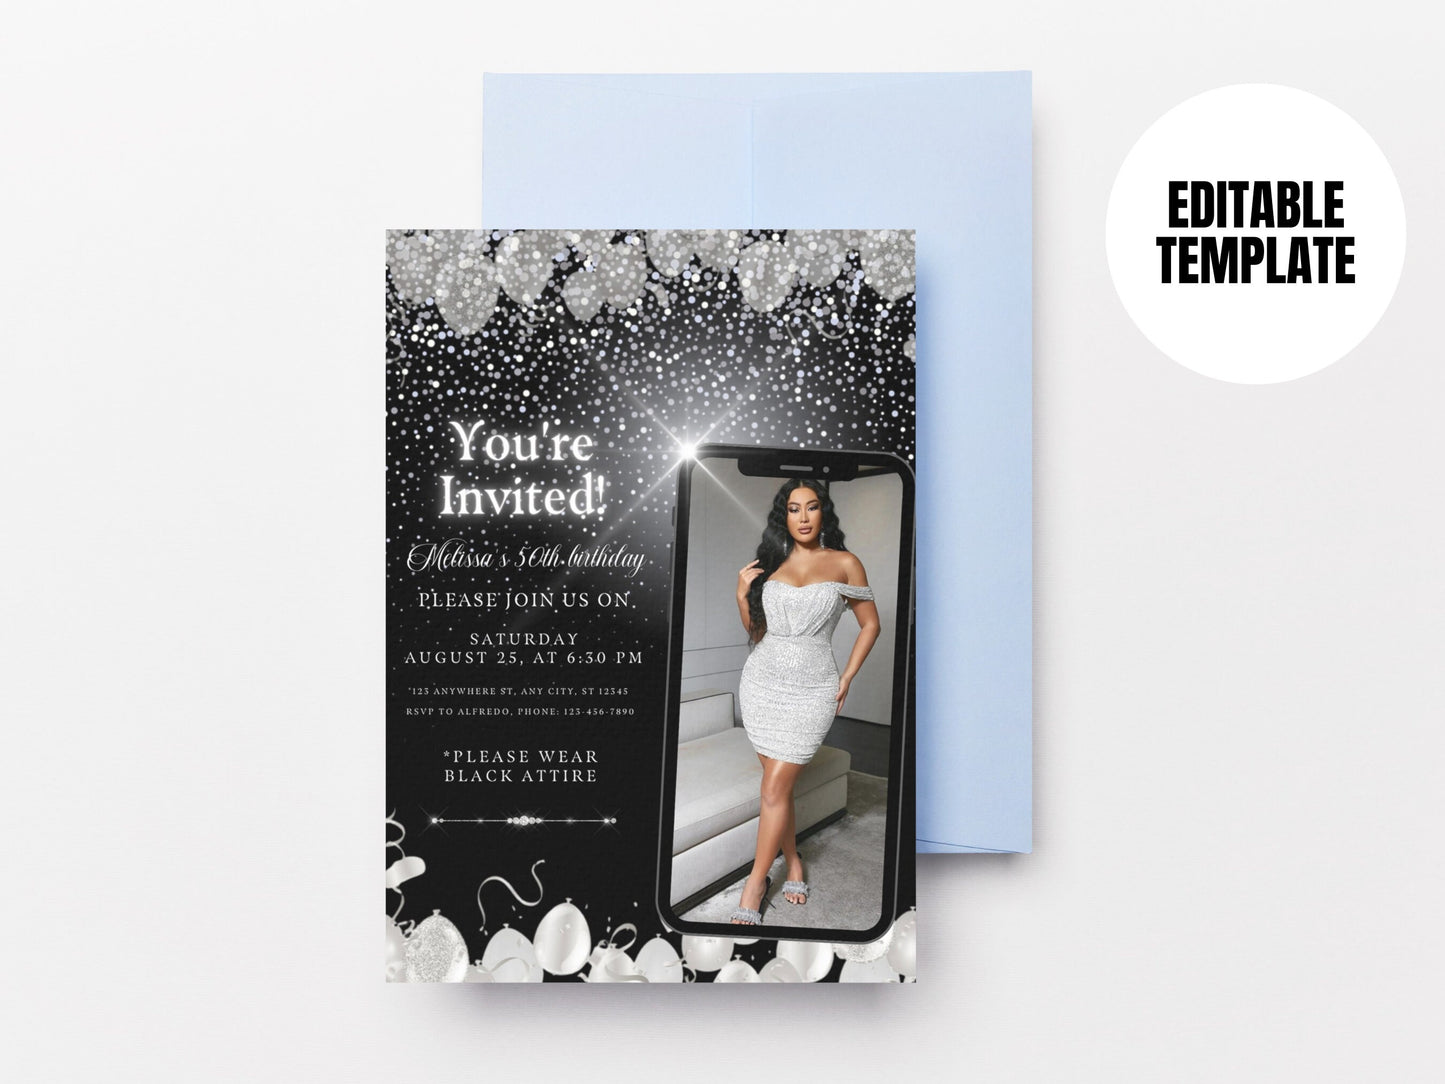 5"x7" Blinged Out Birthday Celebration Flyer| Template | DIY Bday party invitation template | Editable Canva Flyer | Silver bday flyer